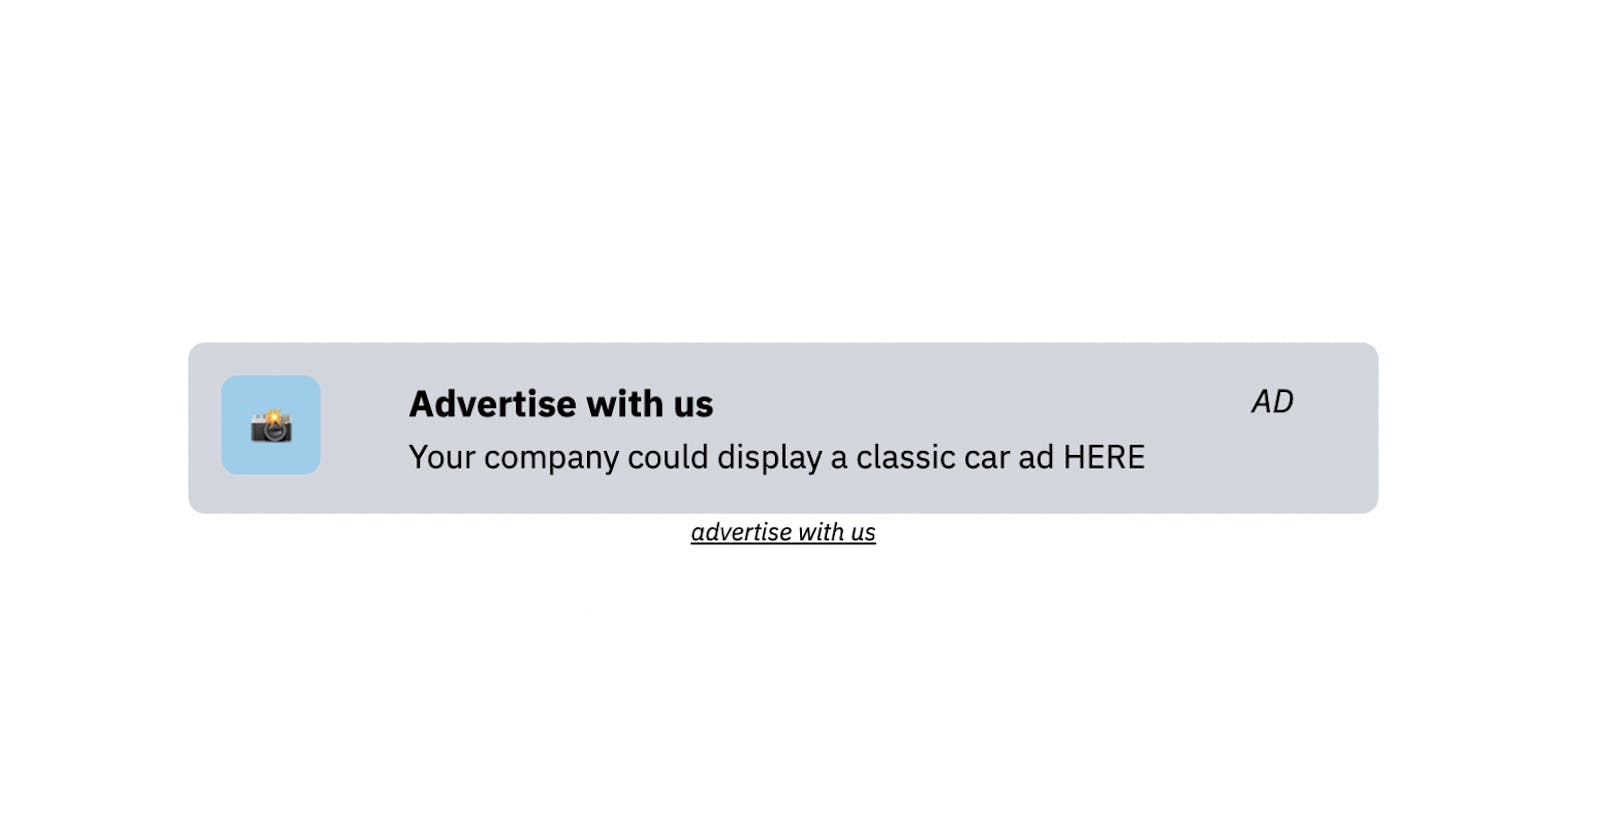 Advertise for free during COVID-19.